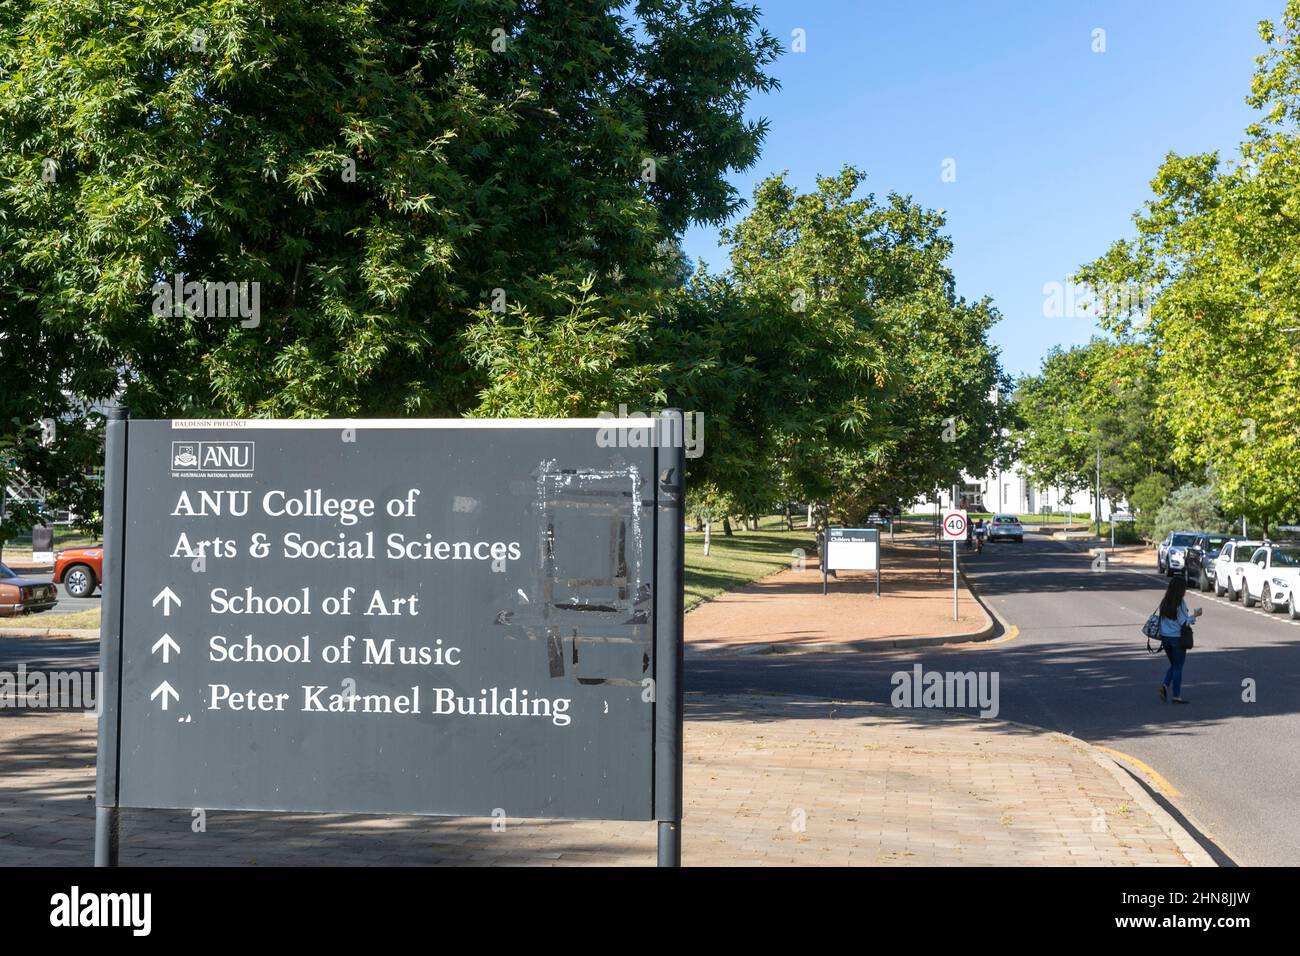 ANU College of Arts and Social Sciences, australian National University, Canberra City Centre, ACT, Australien Stockfoto